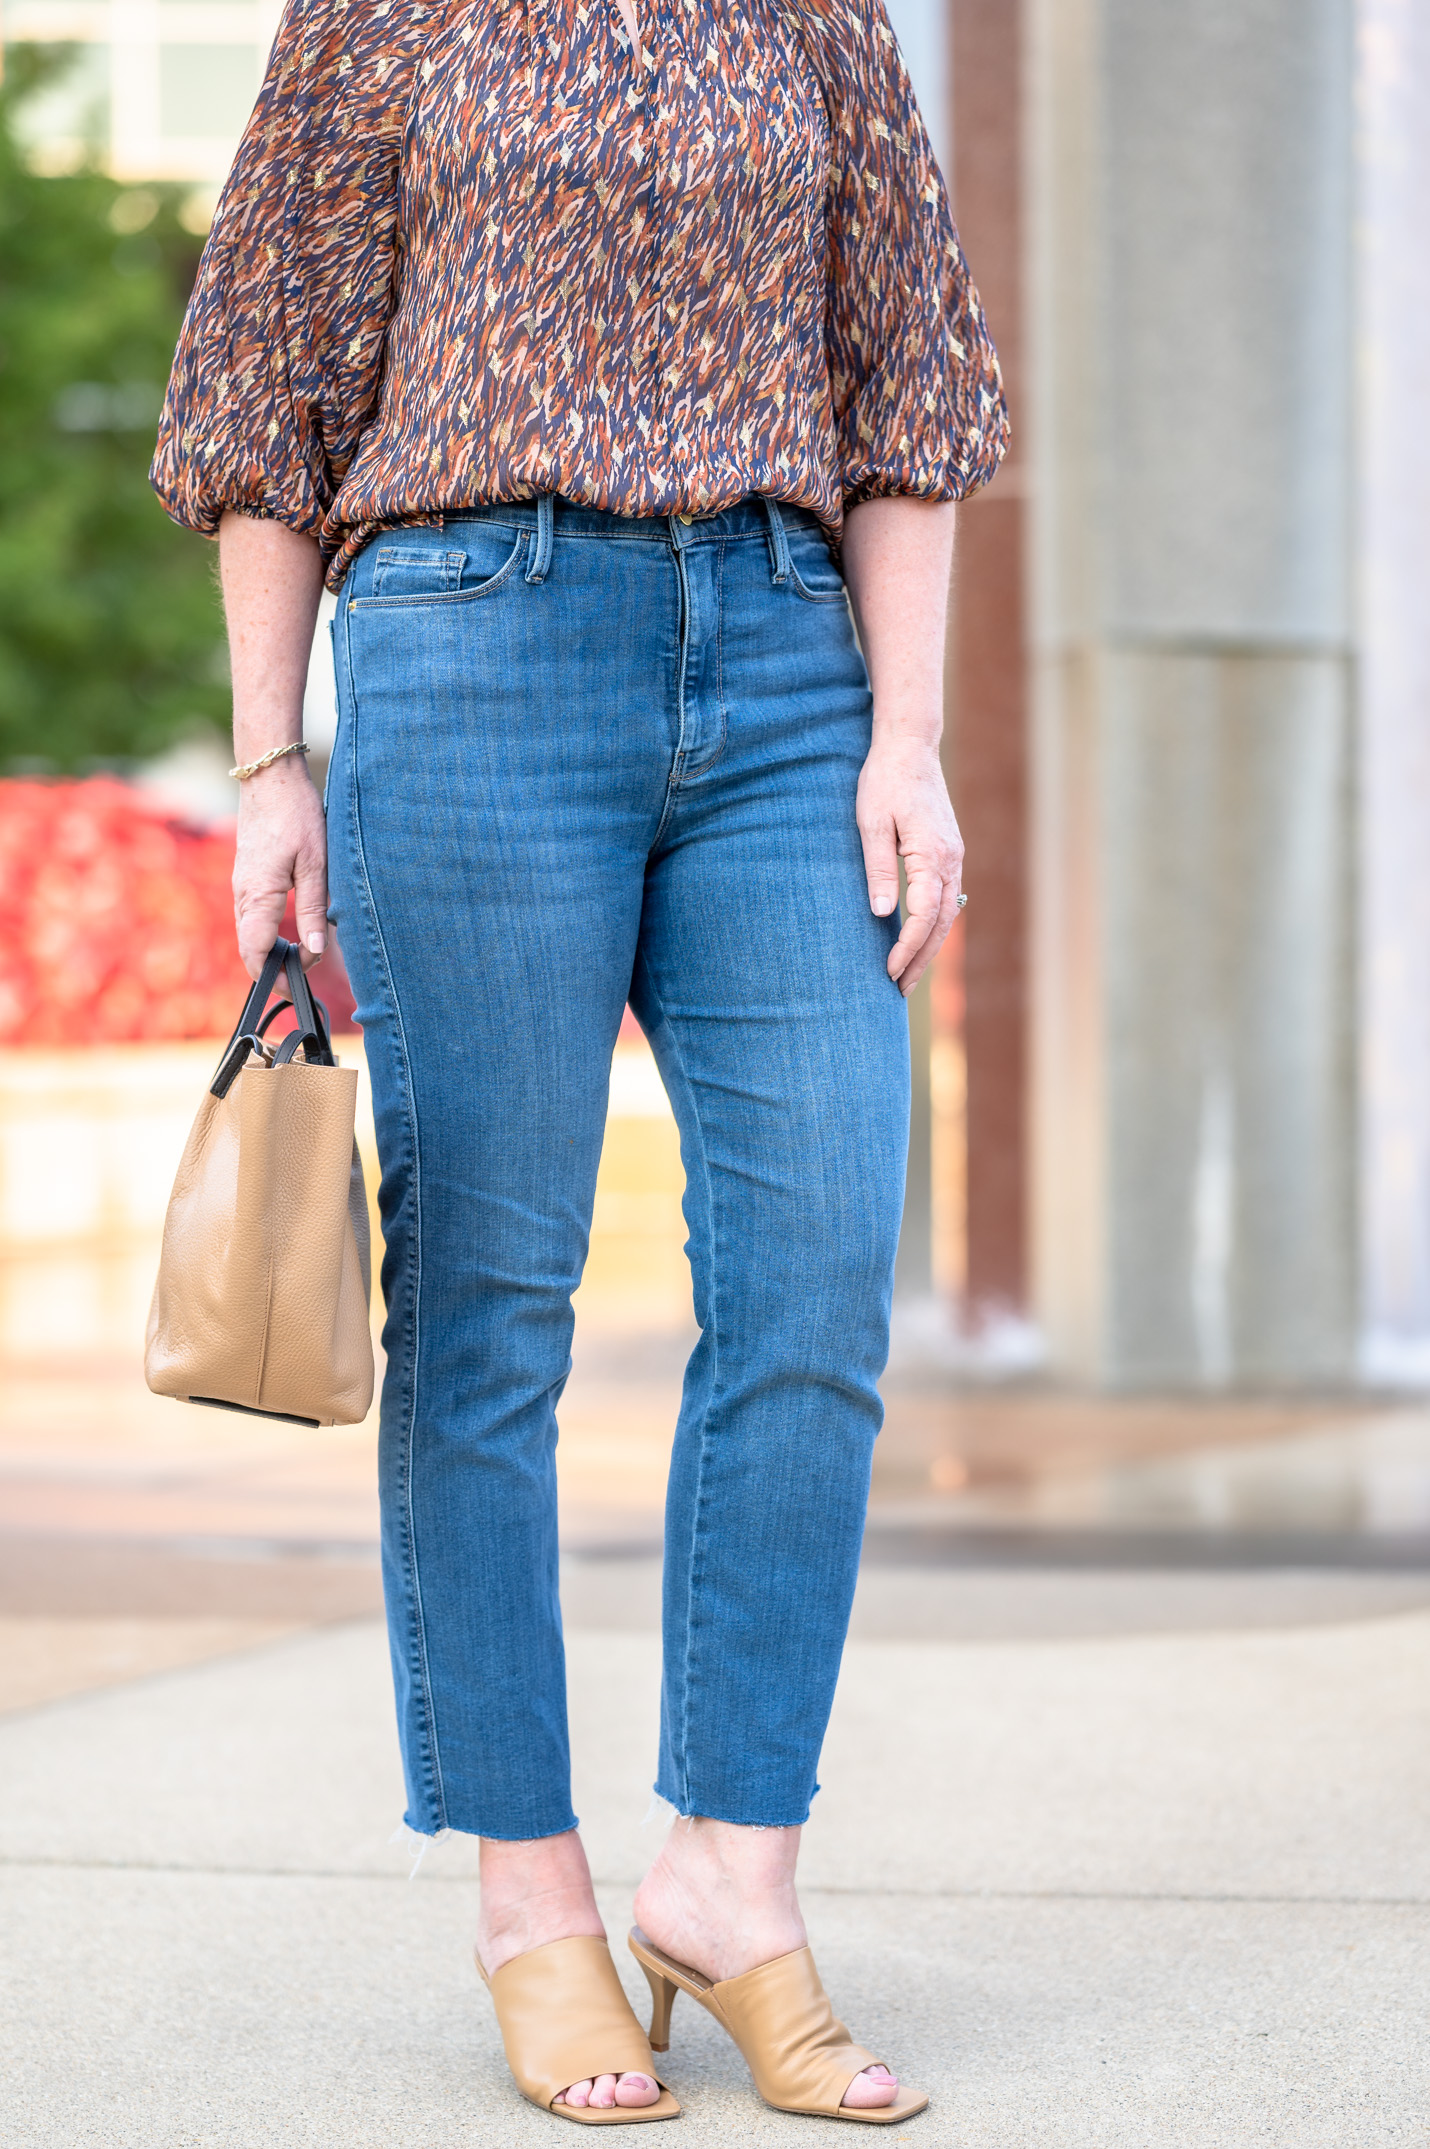 Blouse and Jeans for Early Fall